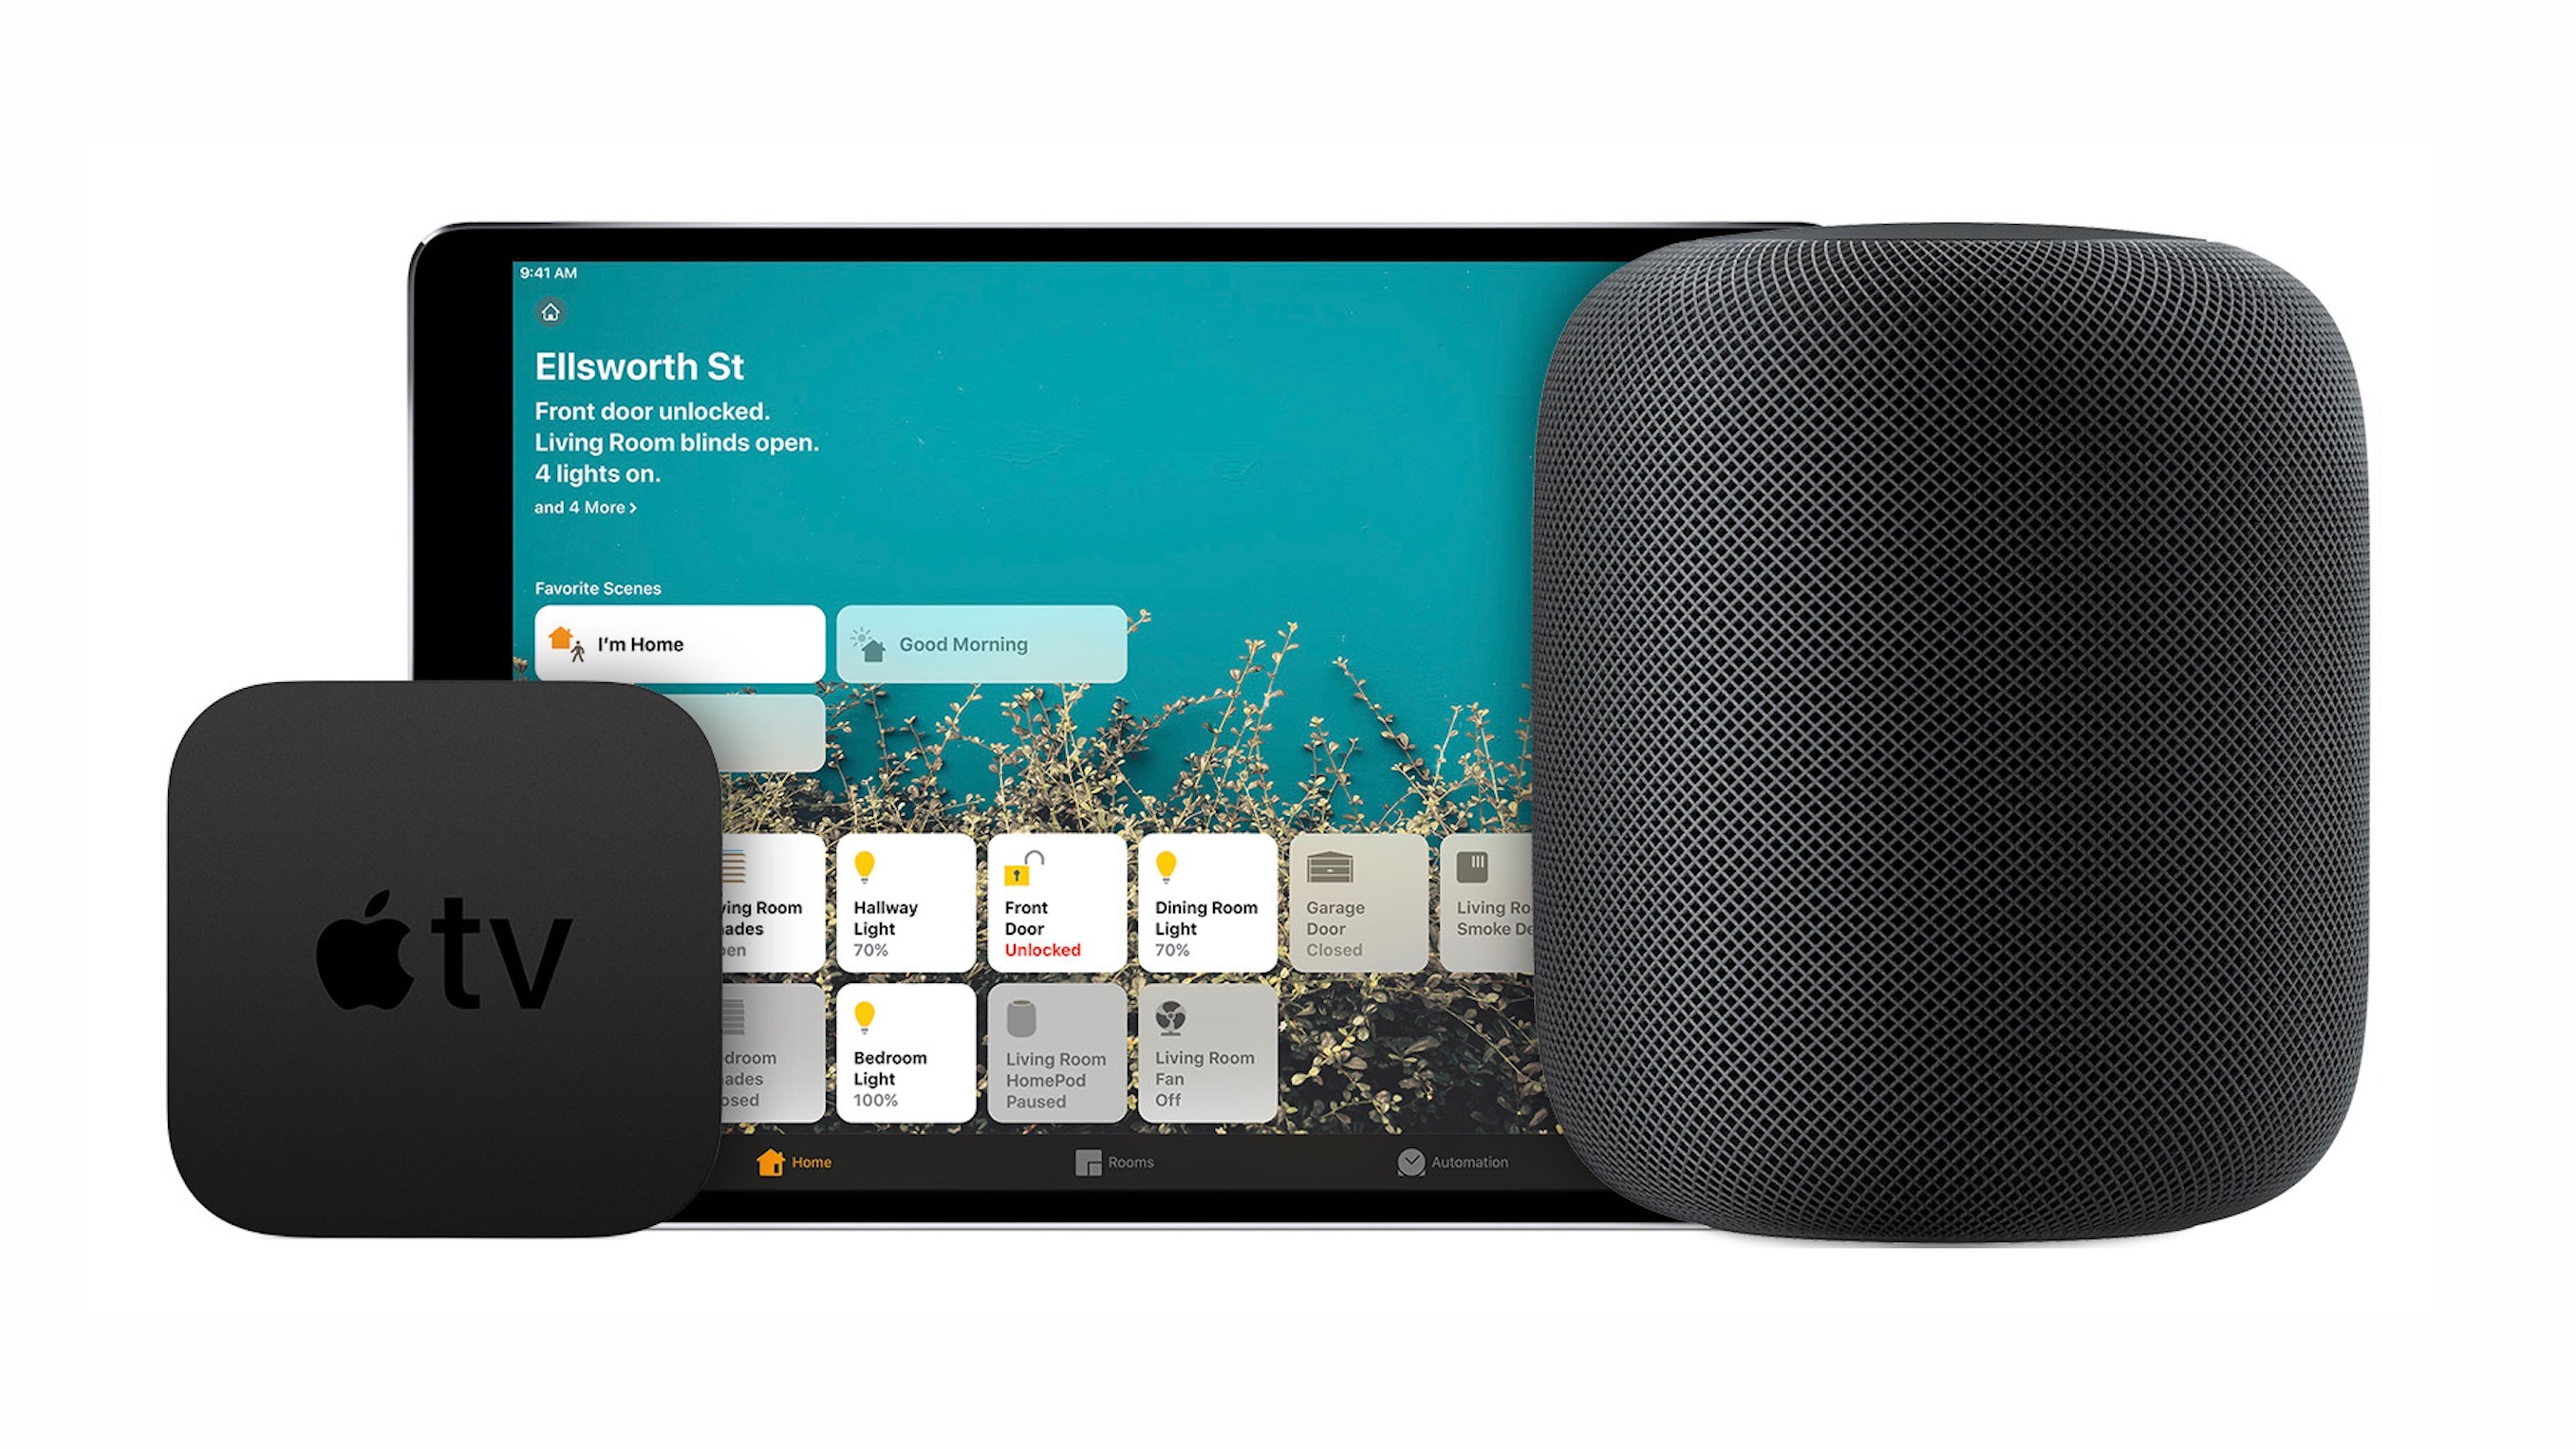 Gruber: Apple loses on HomePod hardware, Apple TV 4K sold at cost - 9to5Mac